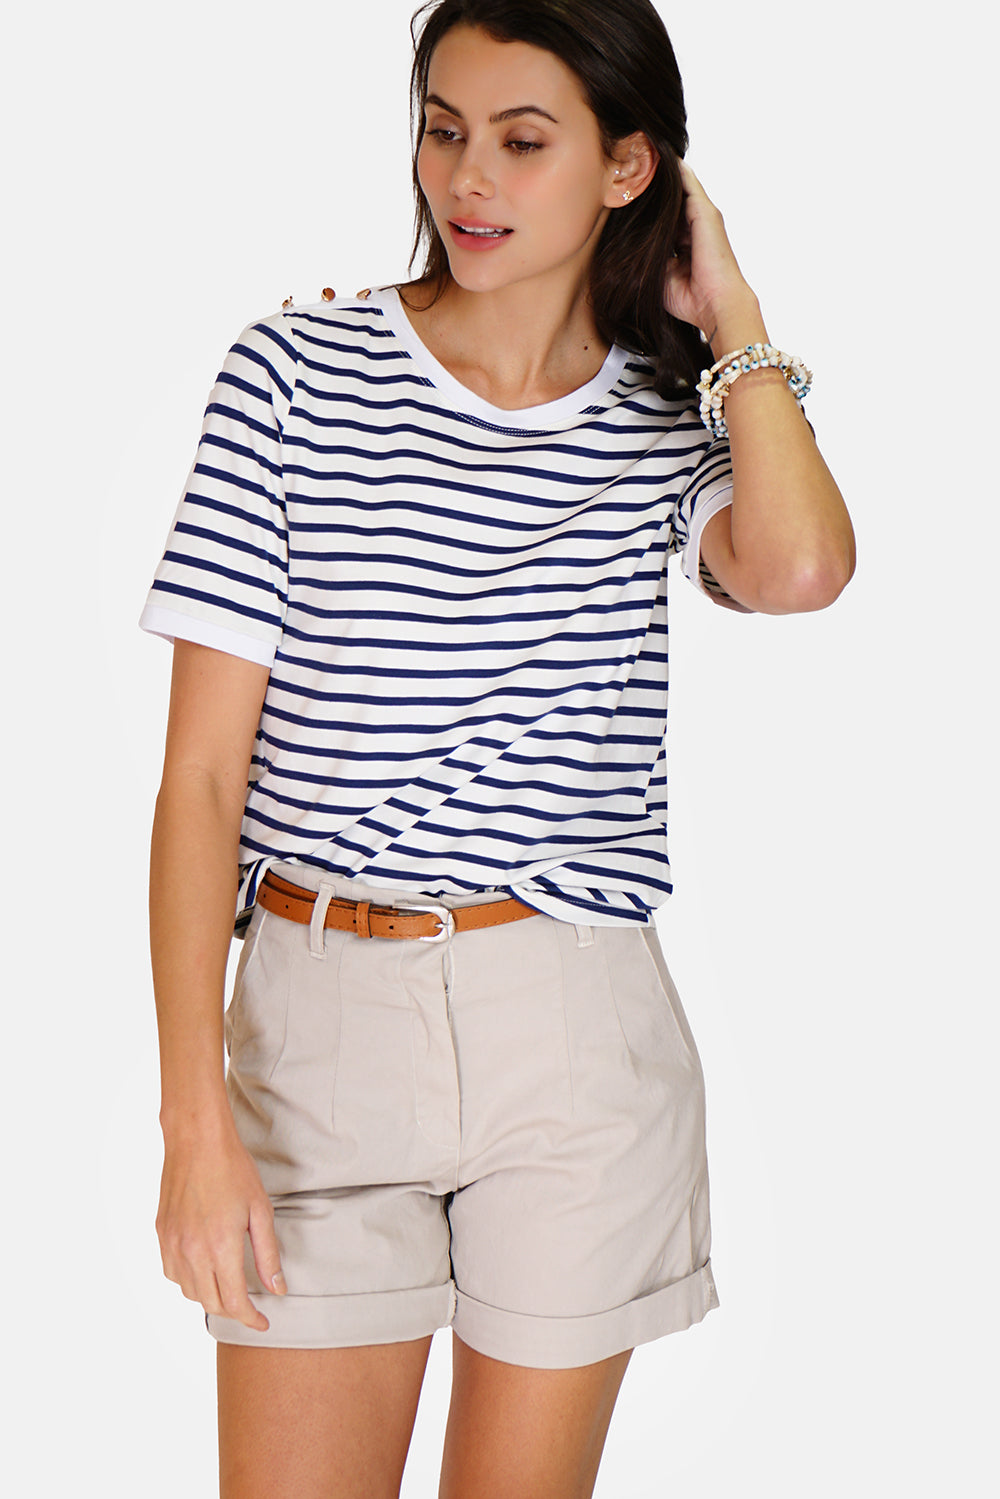 Sailor T-shirt with round neck, fancy buttons on the shoulders, short sleeves